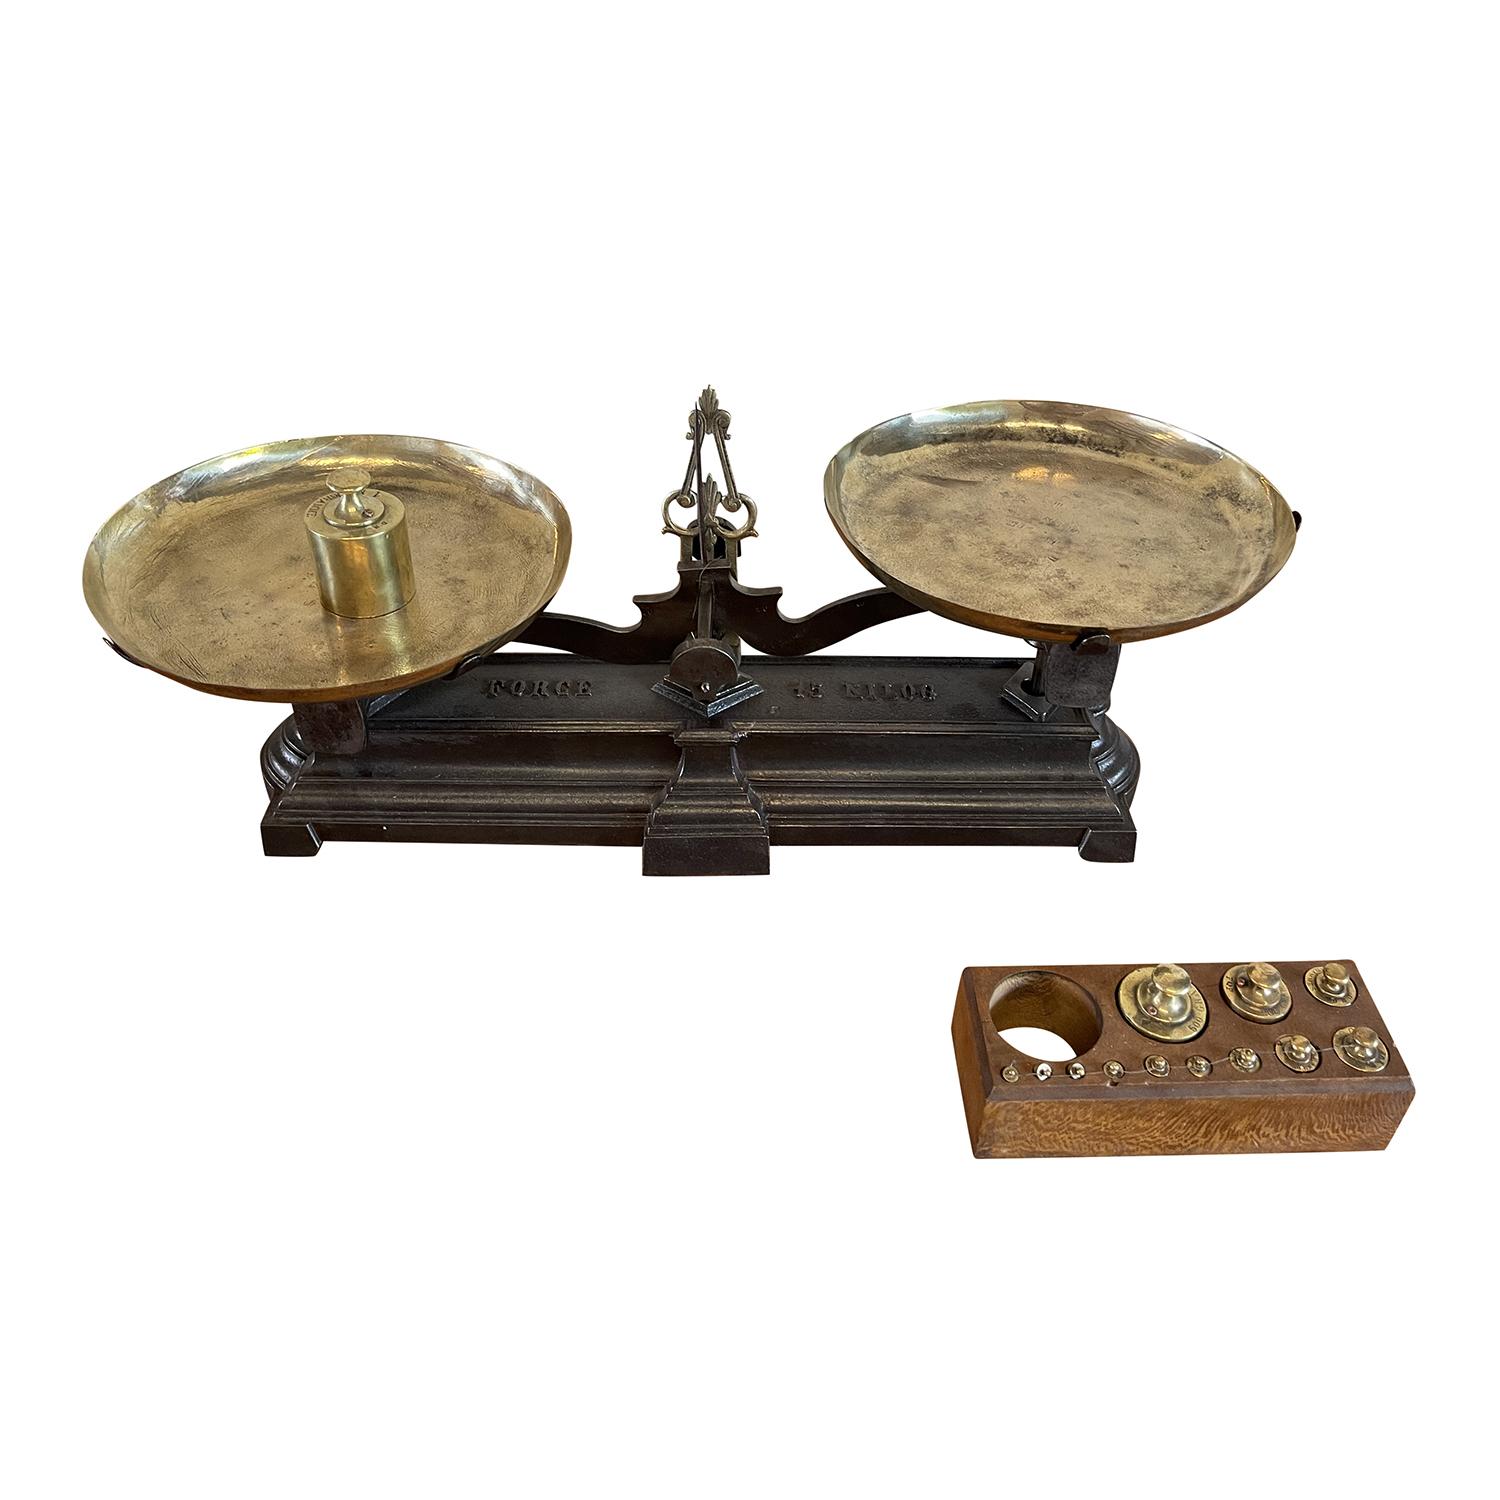 An antique French intricate brass balance with different weights in solid brass, in good condition. The iron scale is topped with the original polished brass plates. The scale reads “FORCE 15 KILOG”. Wear consistent with age and use. Circa 19th